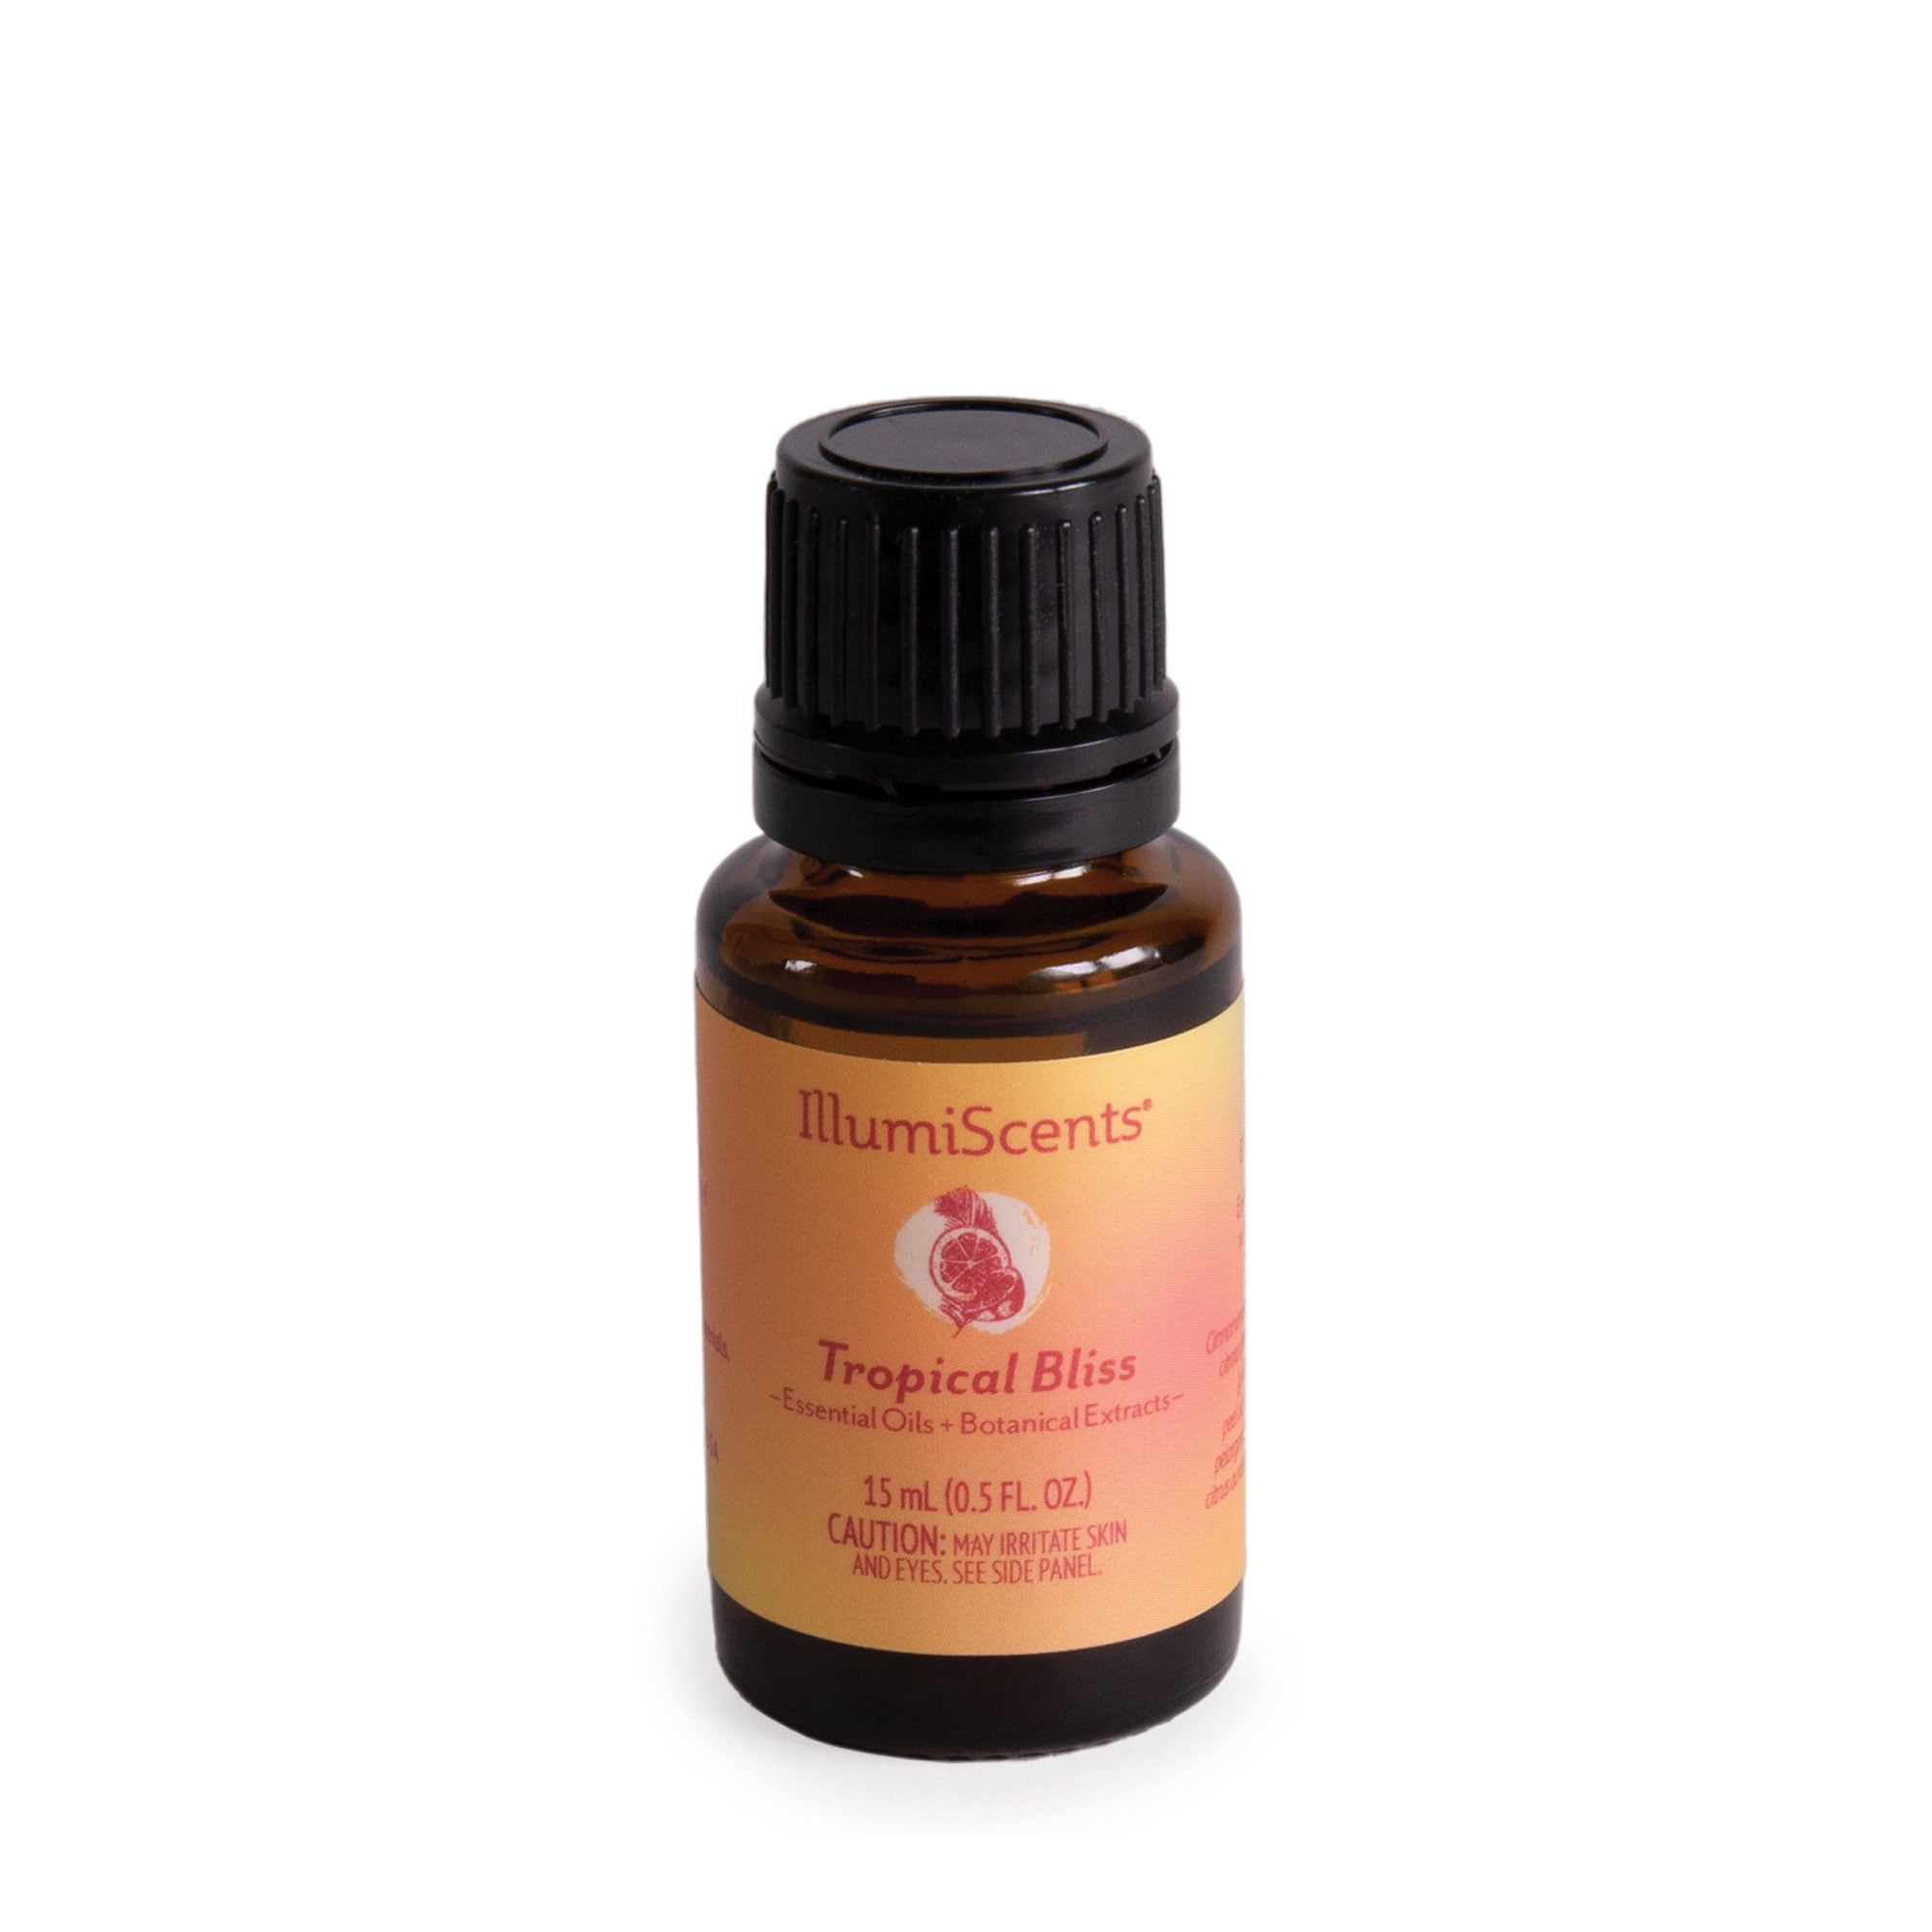 IllumiScents Candles IllumiScents Tropical Bliss Blend, All Natural 15 ml Essential Oil Blend